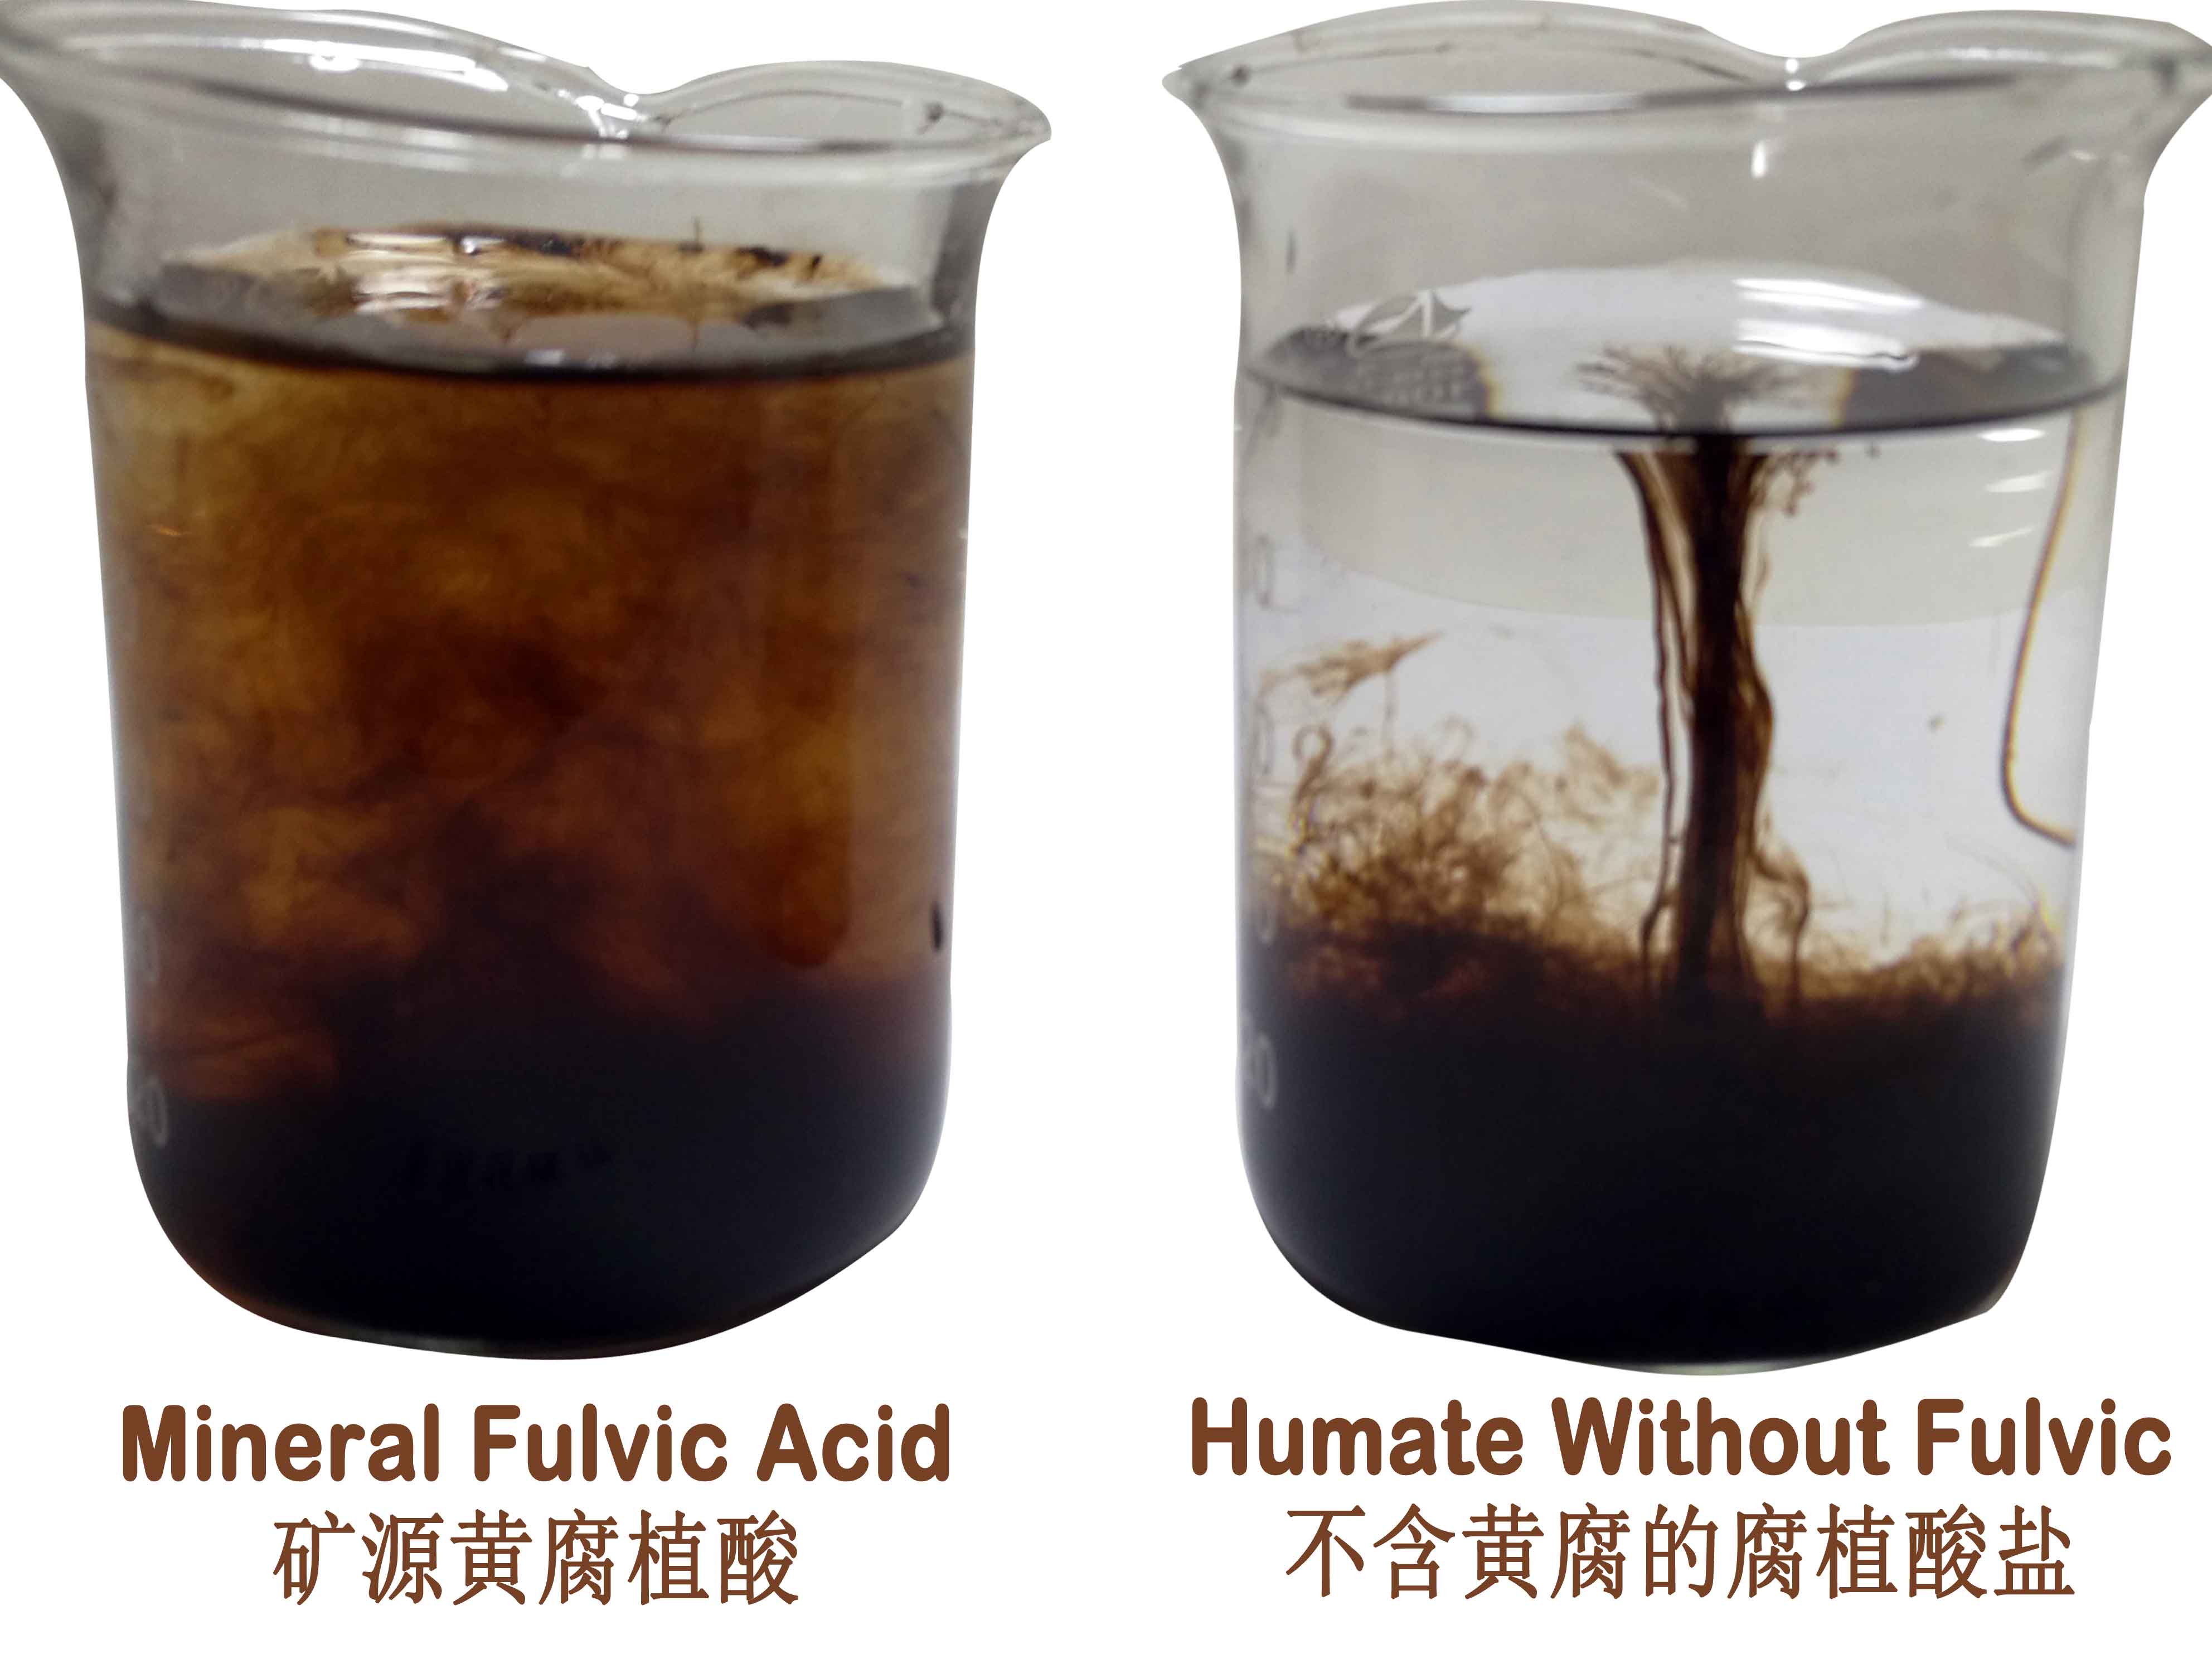 The higher the PH of humate, the better the product Can lignite without fulvic acid produce fulvic acid.